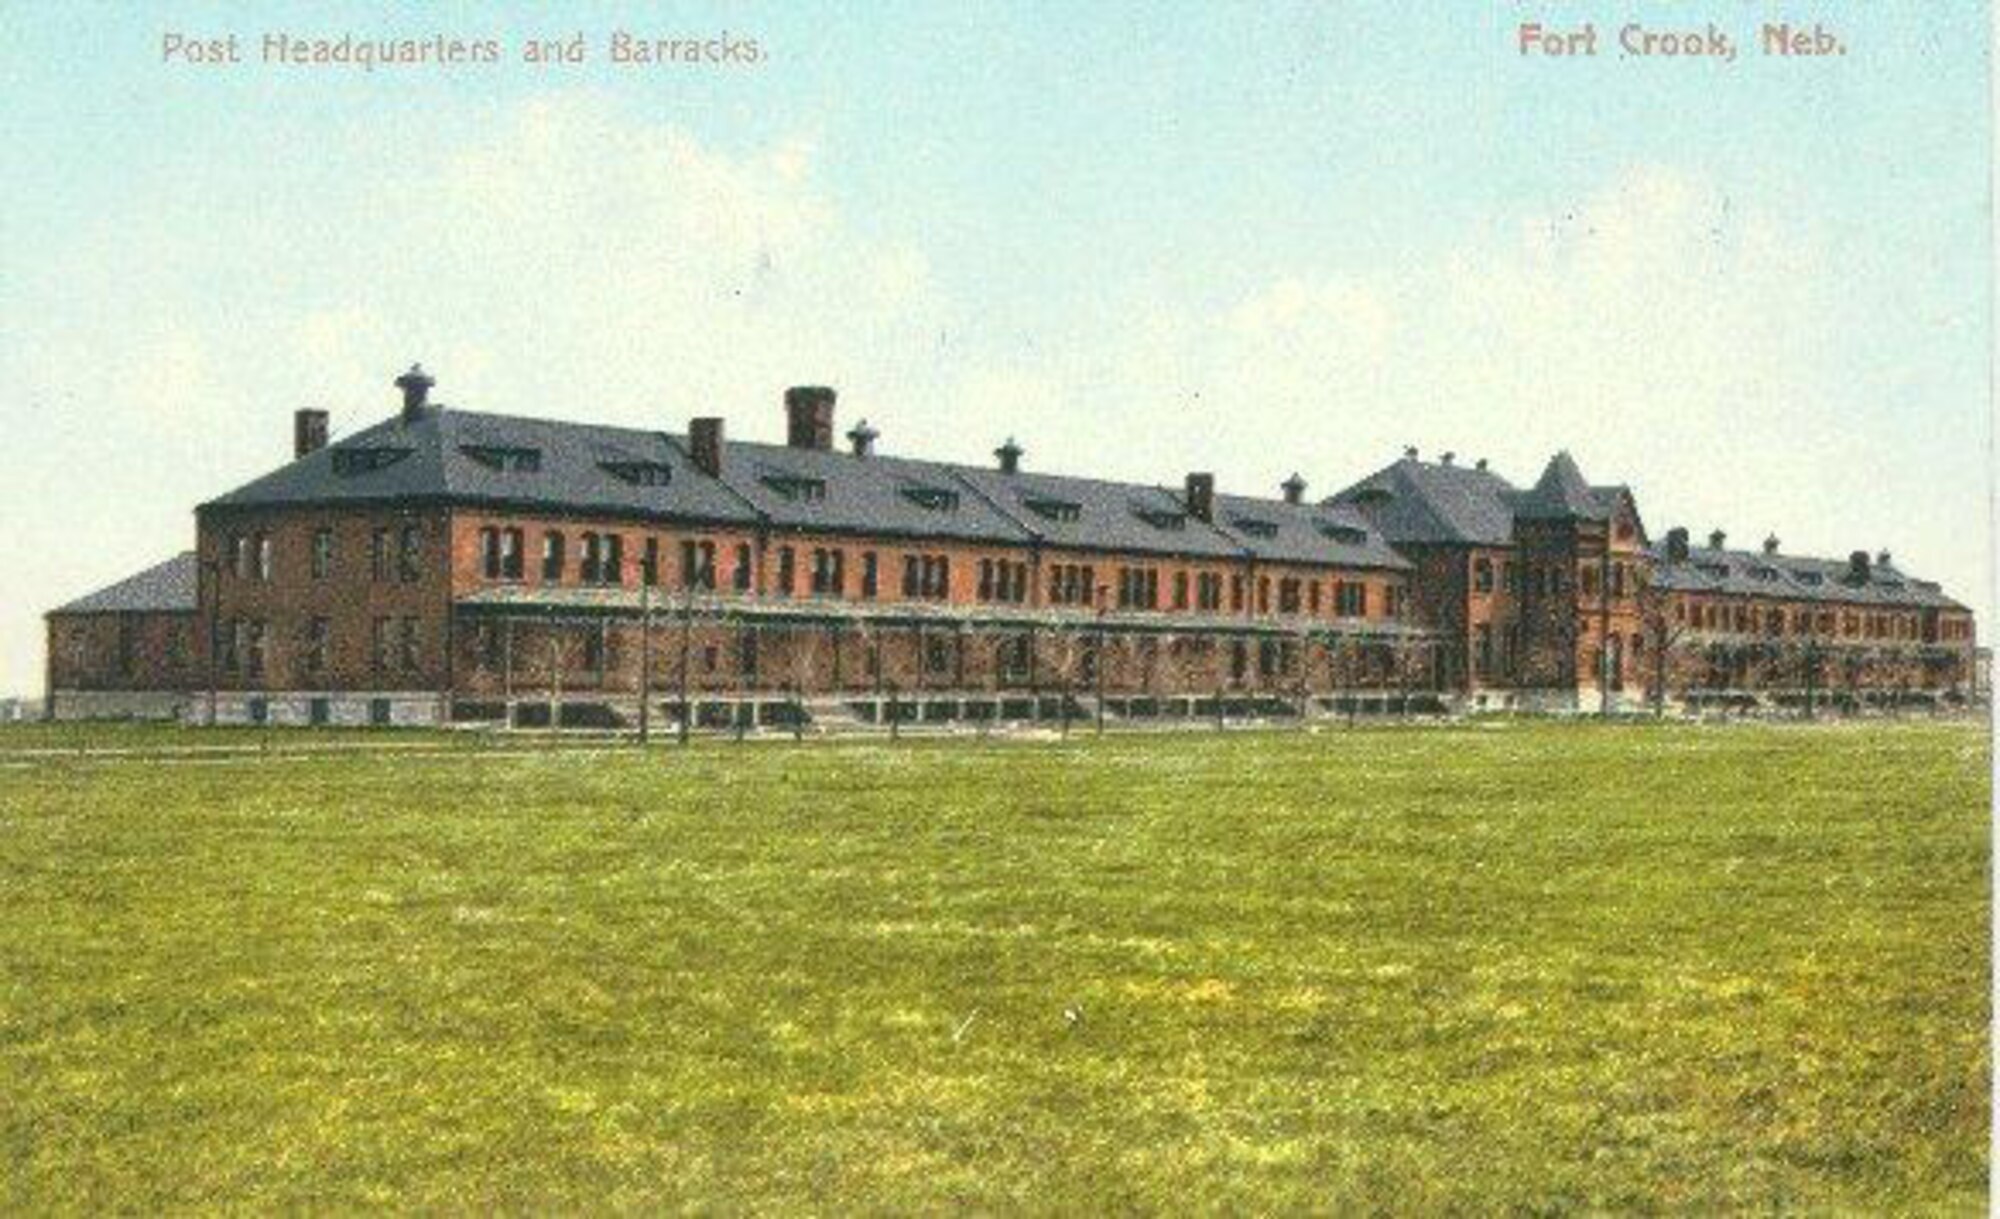 A postcard with an artist’s rendition of Building 40, which was built in 1894 at Fort Crook, Nebraska. The middle section was used for administrative space while the two wings were used as barracks that could accommodate up to 496 men. The middle section was destroyed by a fire in 1946, creating two separate buildings, Building 40 and Building 49. (Courtesy photo/55th Wing Historian)